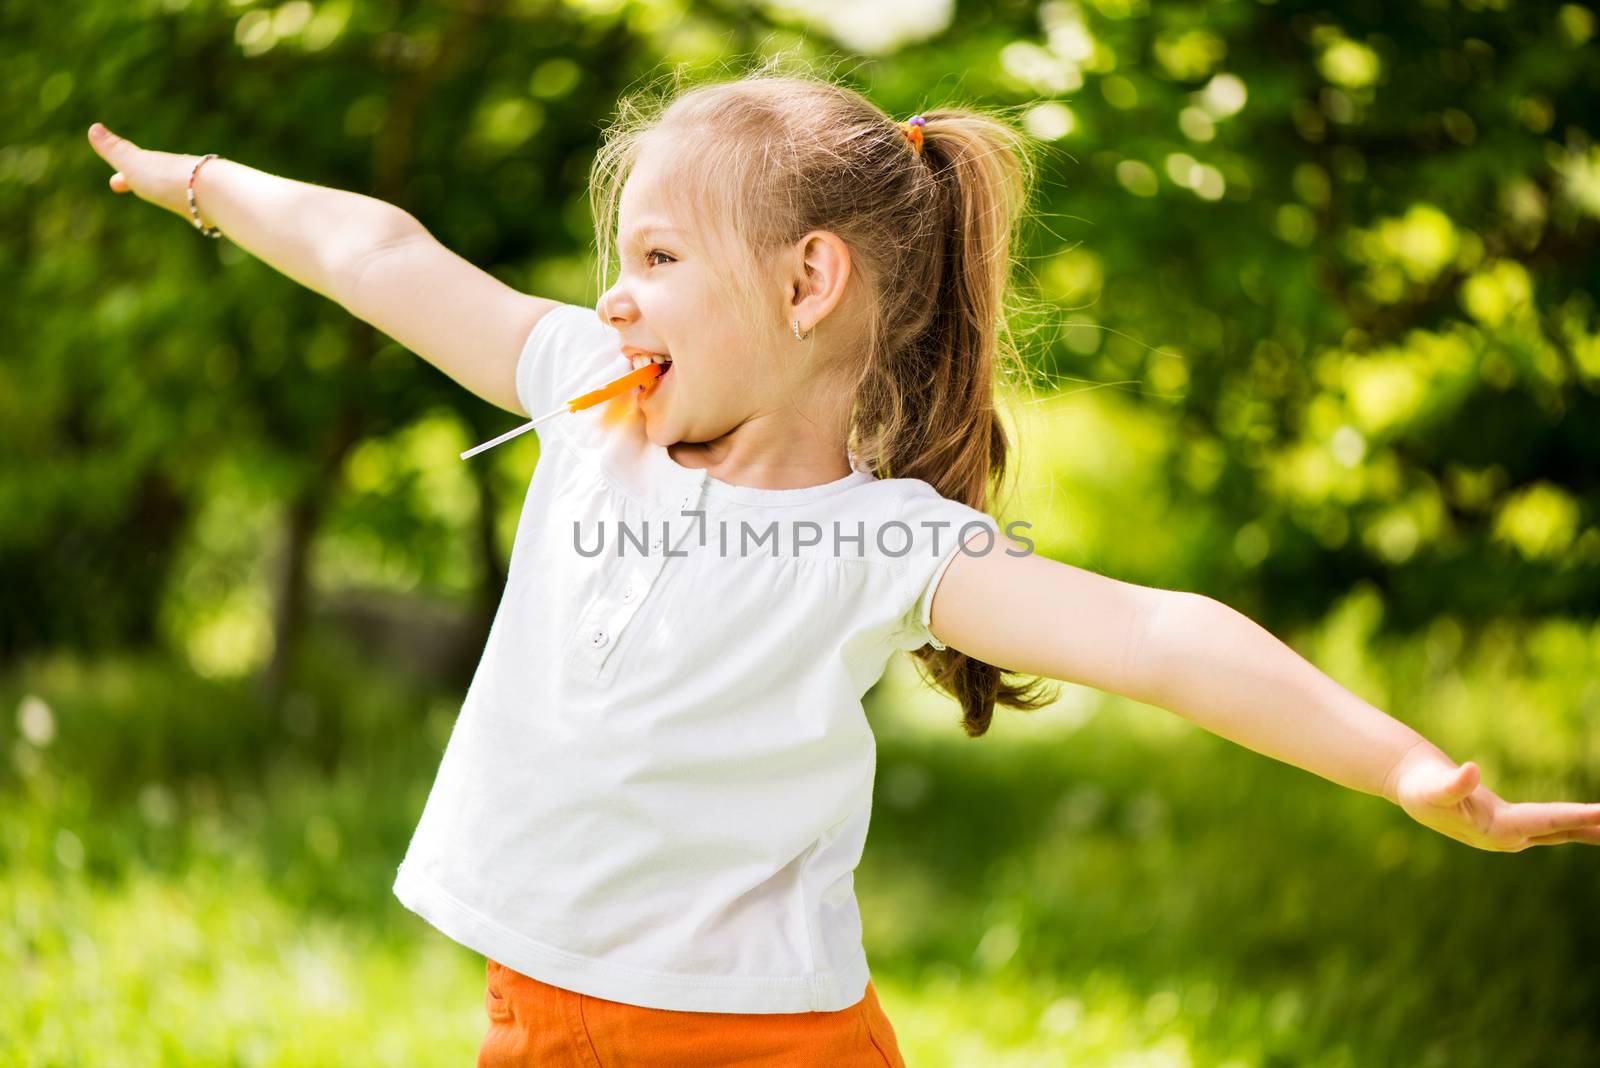 Cute Little Girl having fun in The Park and holding in mouth orange Lollipop.